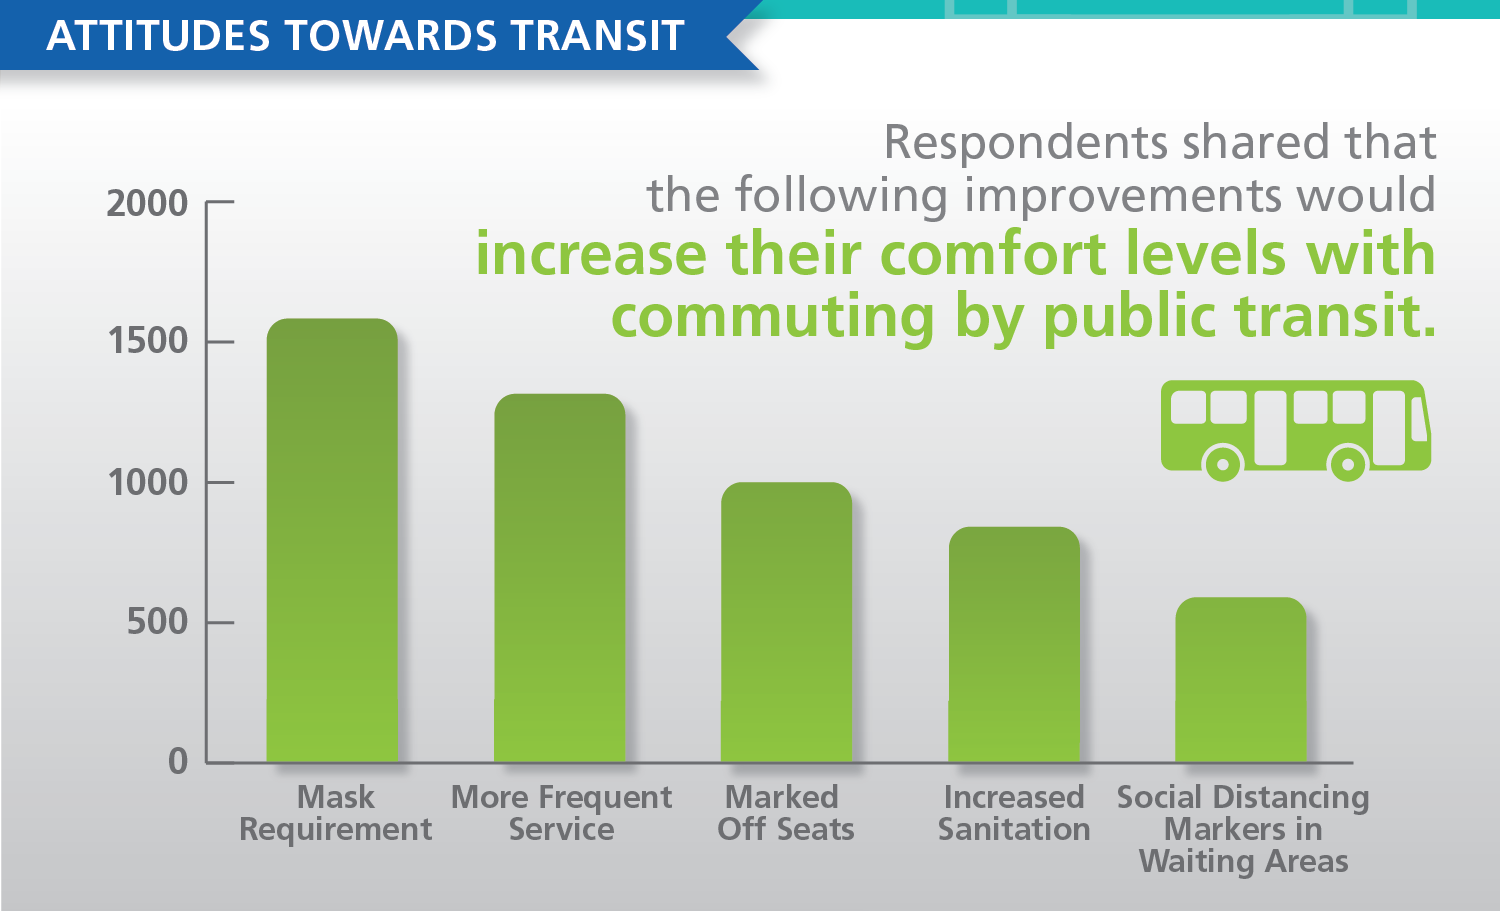 When asked what would improve how they feel about taking transit during COVID-19, respondents prioritized wearing masks and avoiding overcrowding through measures like more frequent service and marked off seats on the transit vehicle.